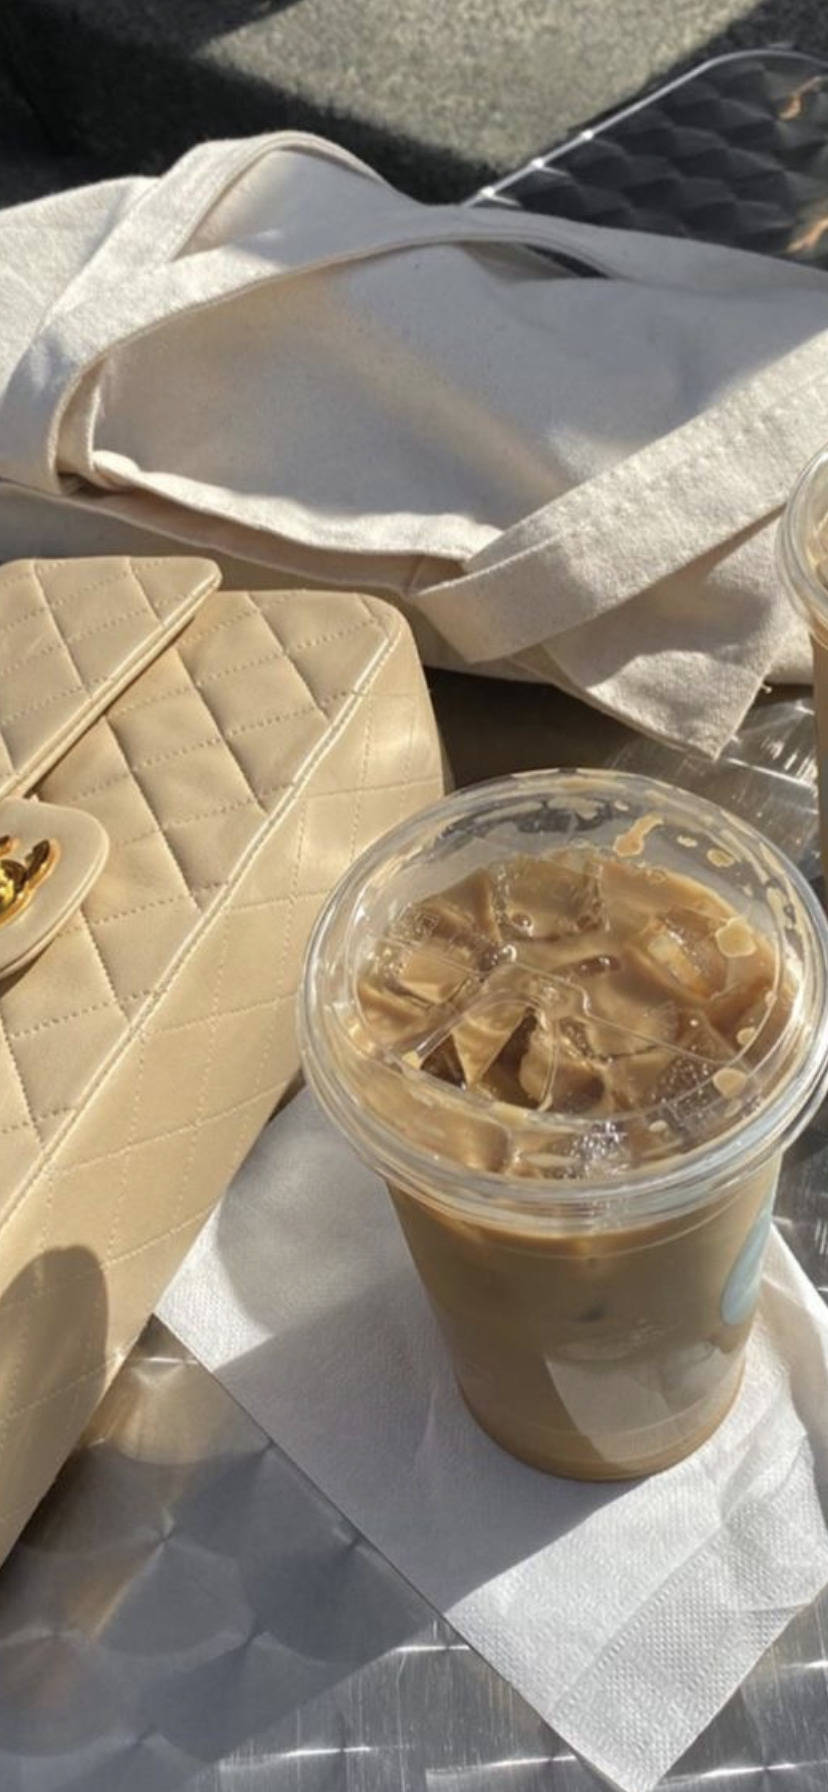 Beige Purse And Iced Coffee Aesthetic Picture